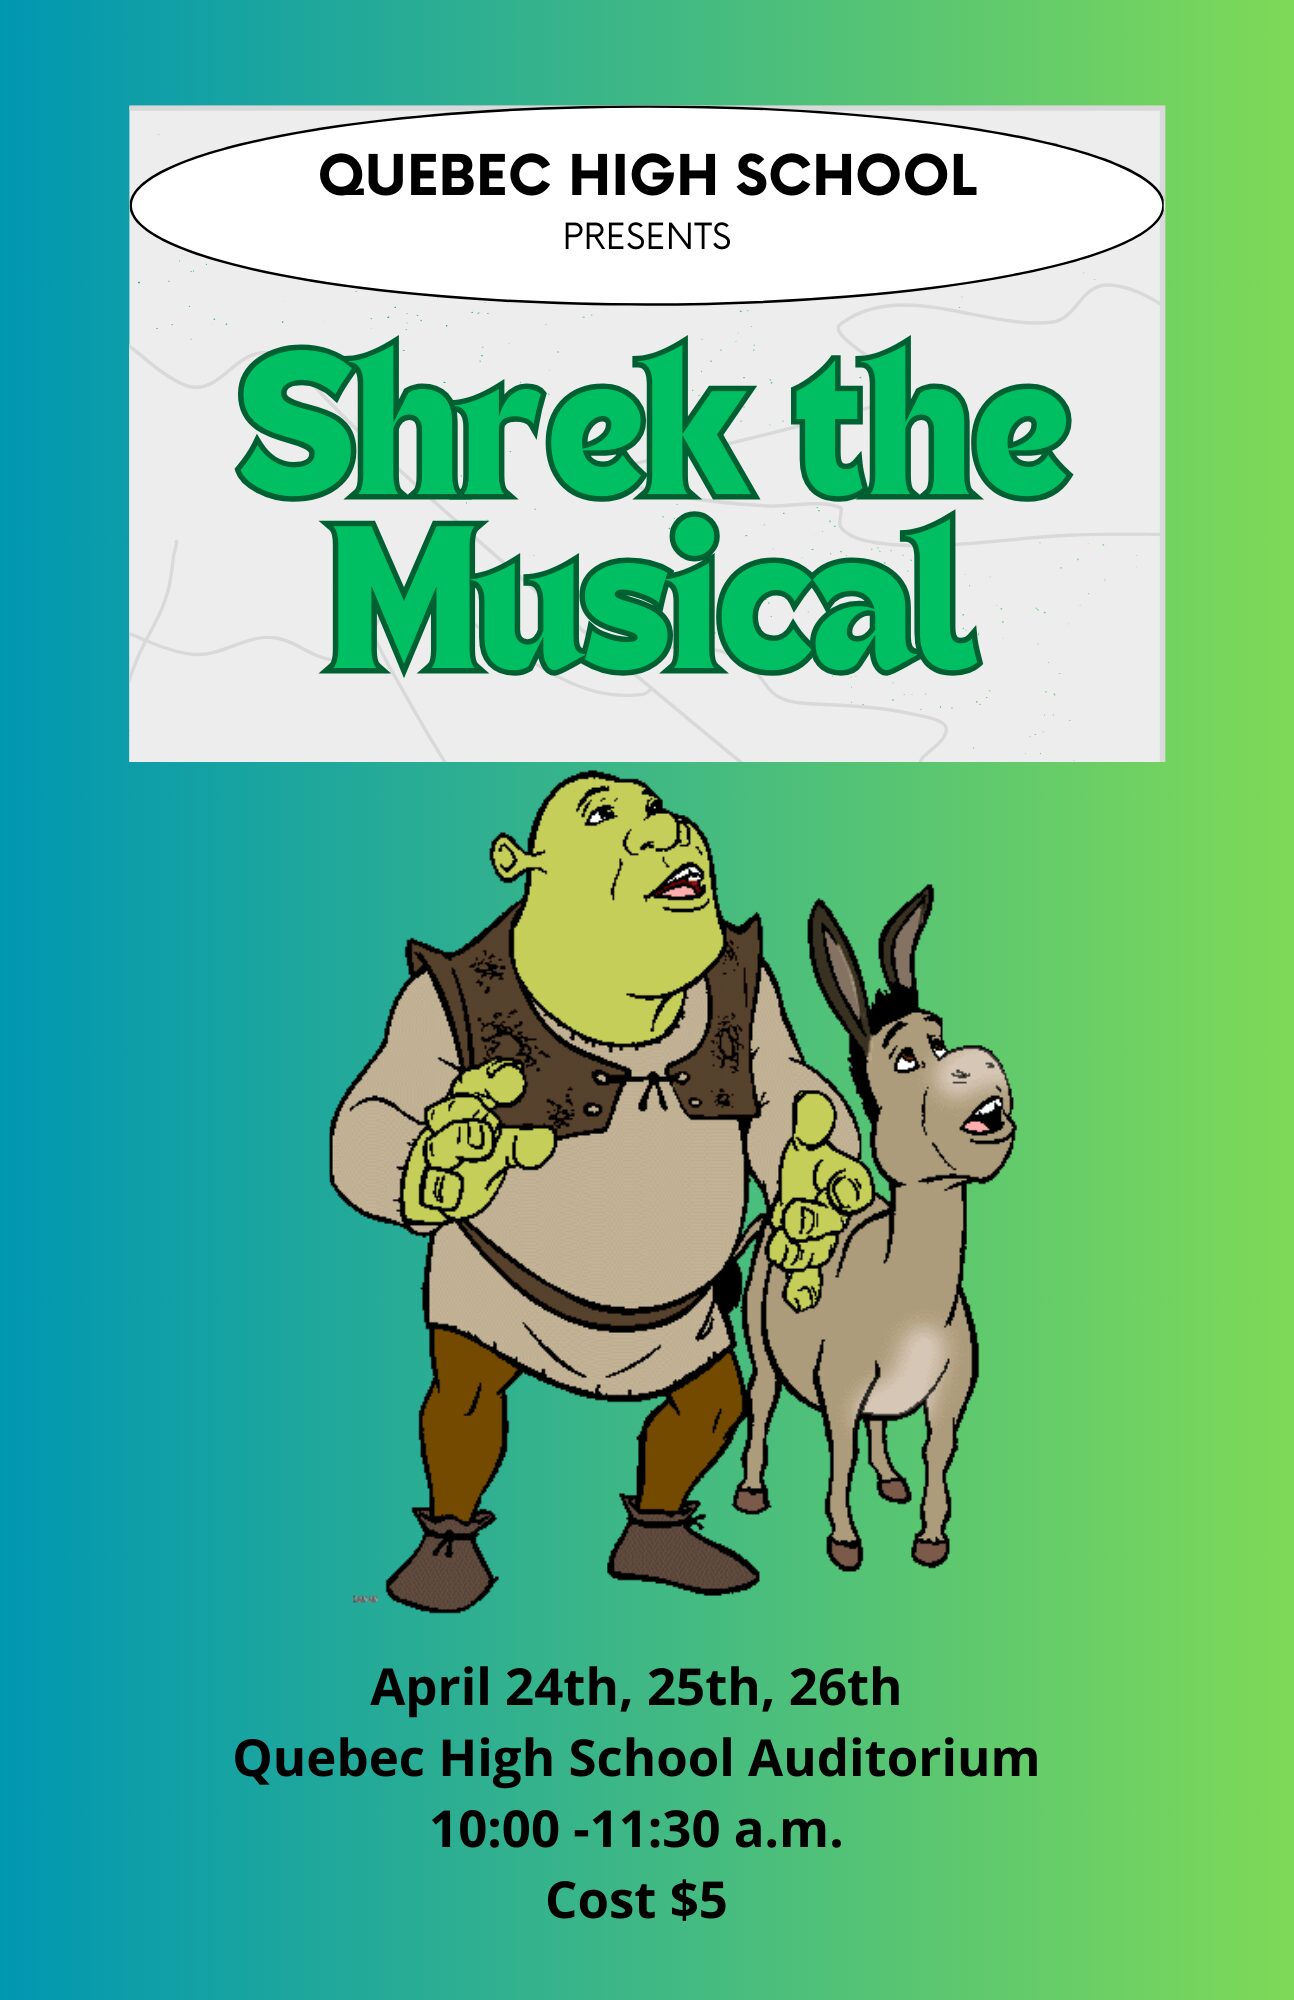 Out & About - Quebec High School's "Shrek the Musical" @ Quebec High School Auditorium